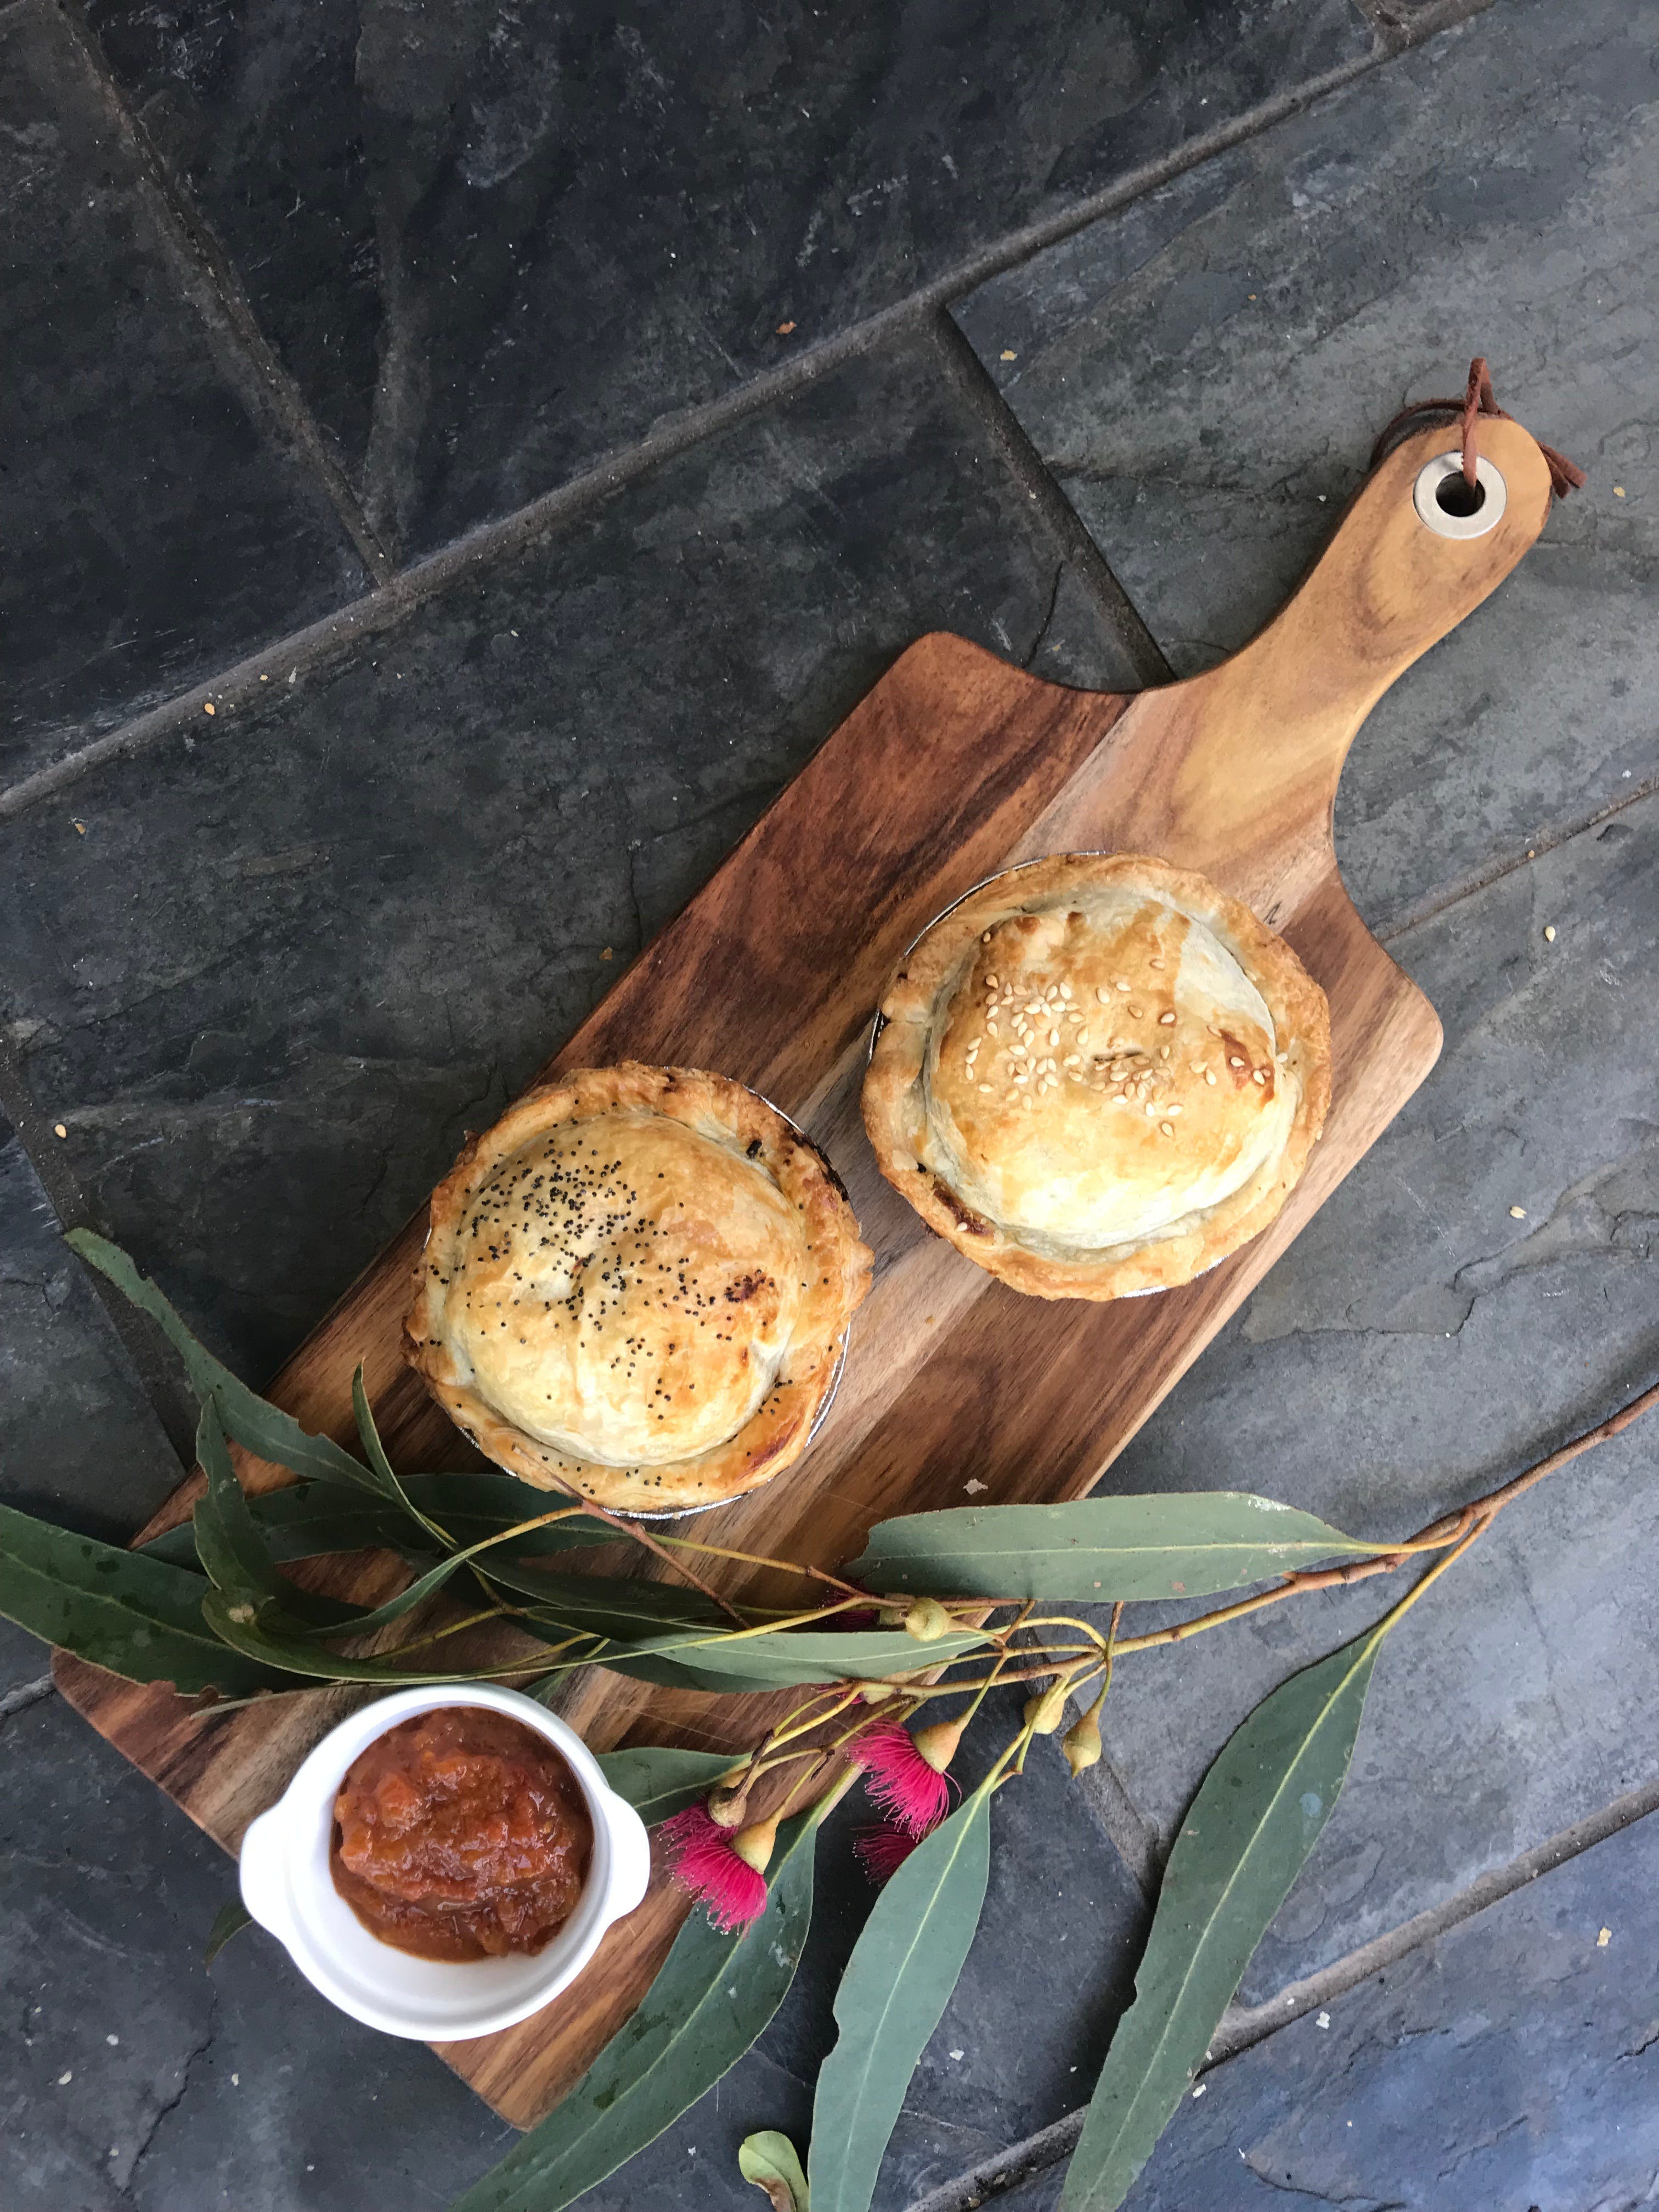 Aged Wine and Vintage Pies - Accommodation Mt Buller